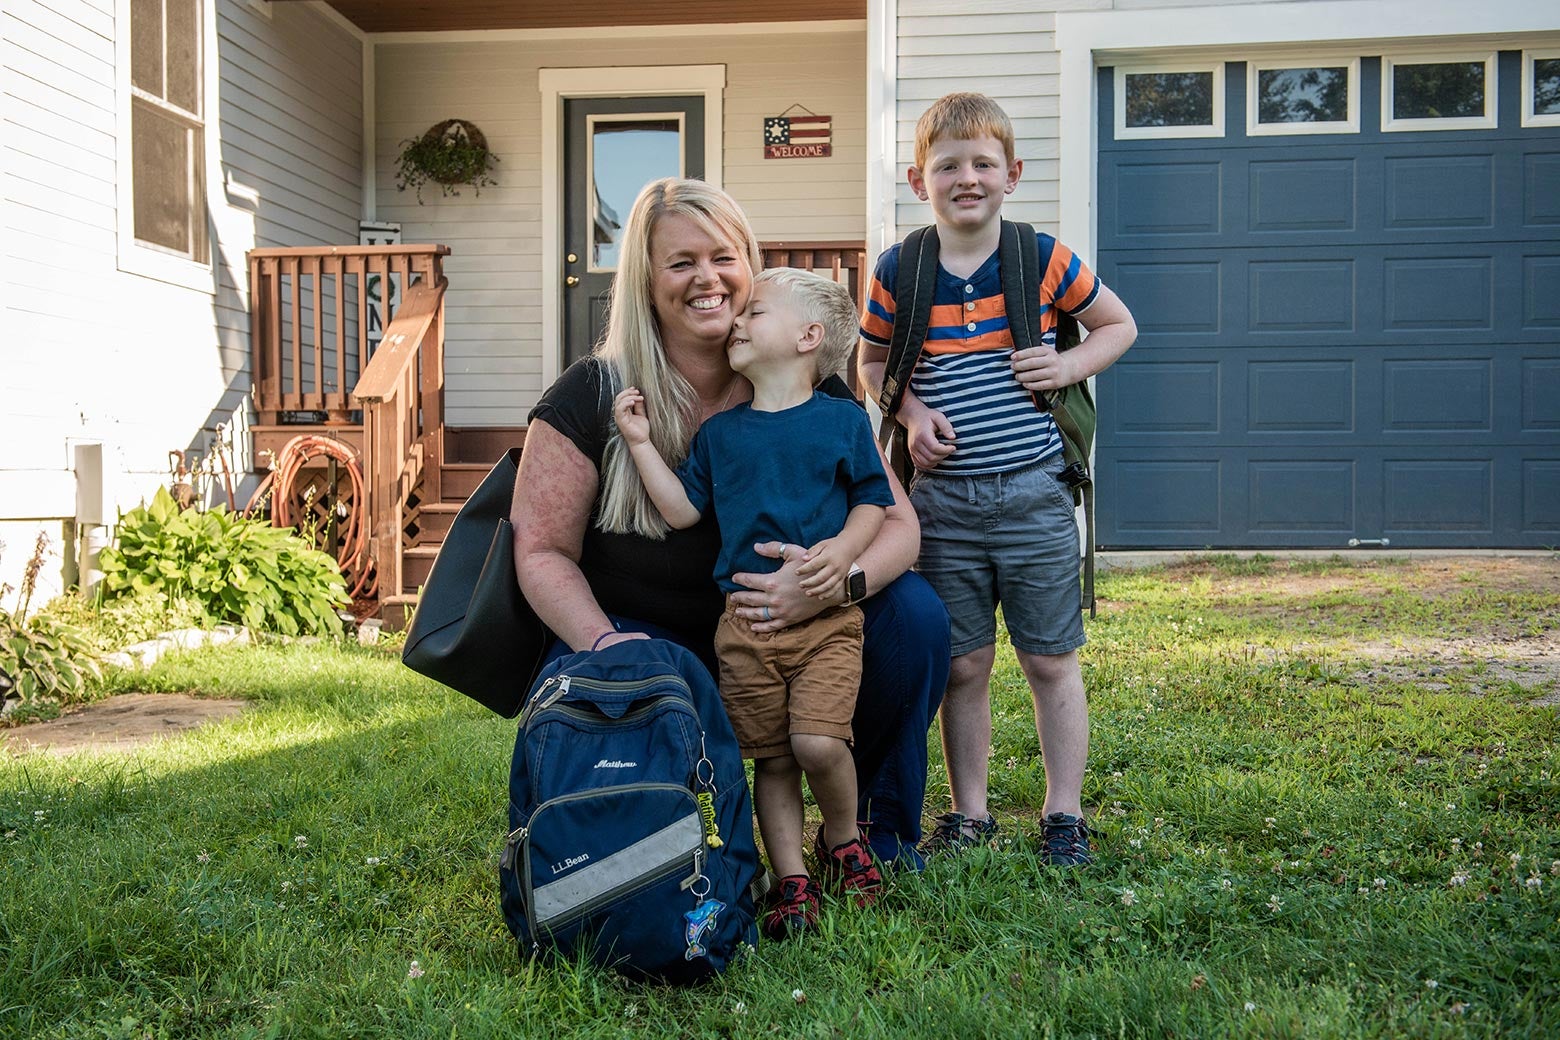 Heather smiles with her two boys in a yard outside a house